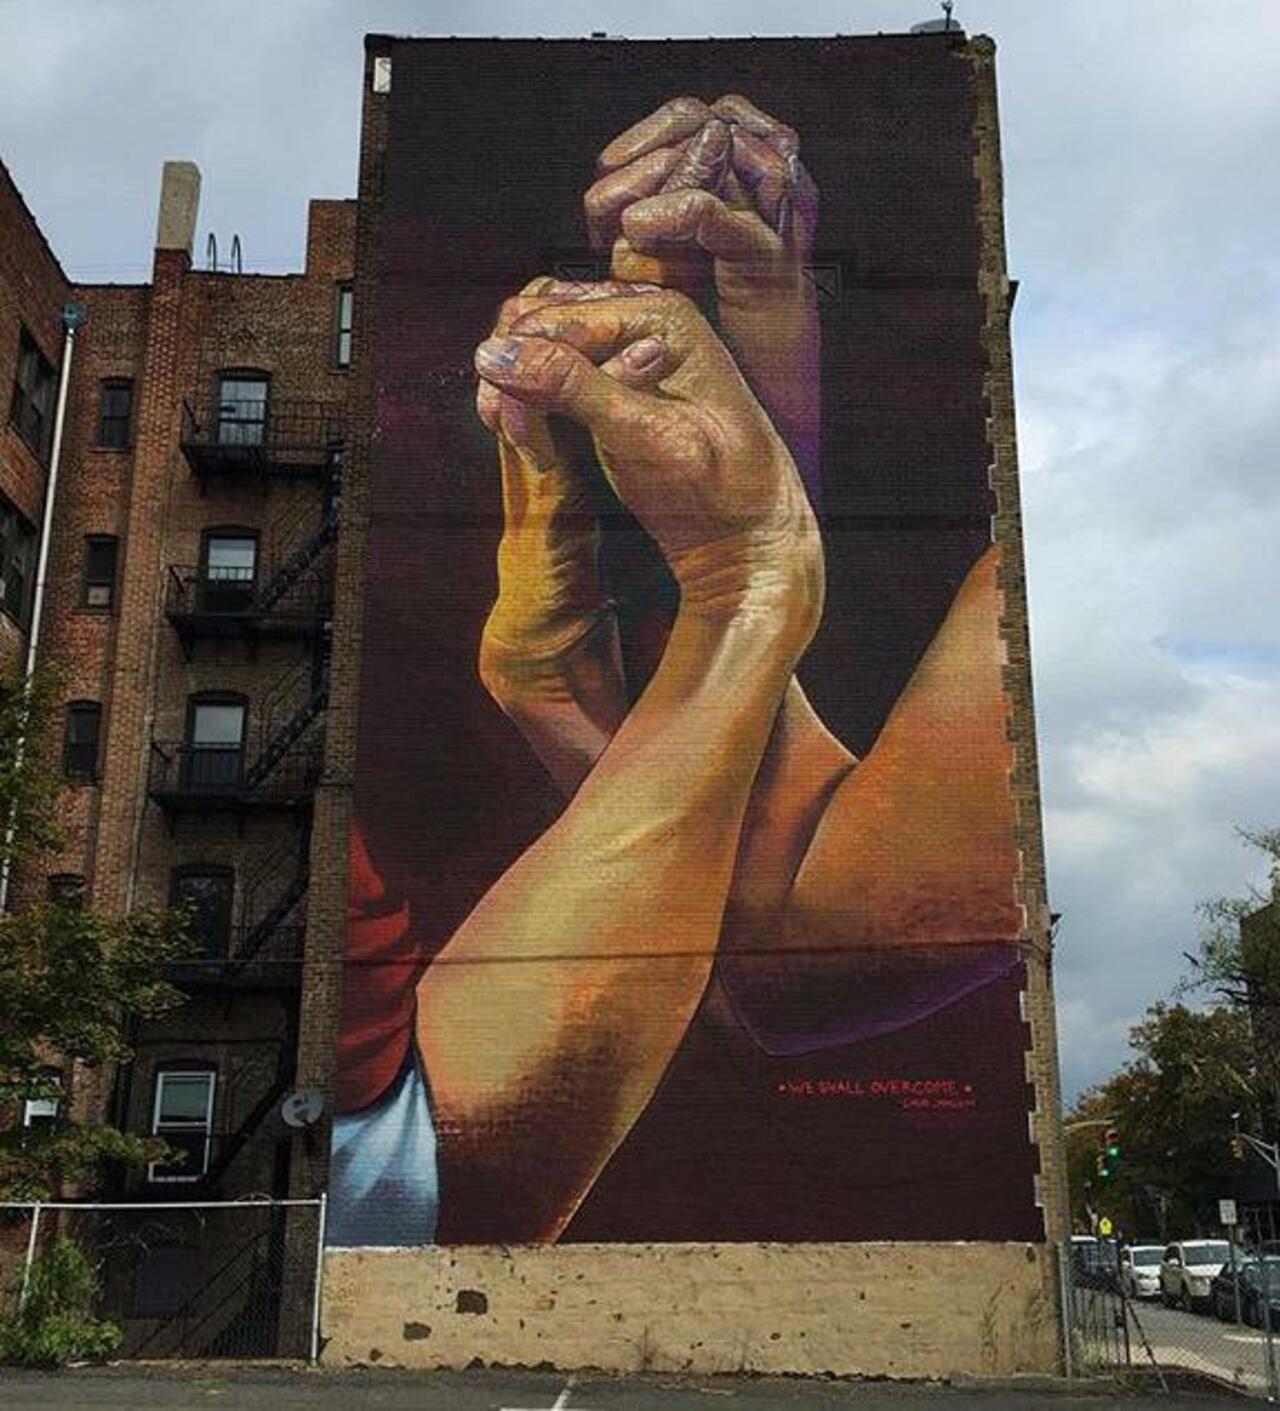 New Street Art by CaseMaclaim in Jersey City for the TheBKcollective 

#art #graffiti #mural #streetart http://t.co/hhJ29baYta